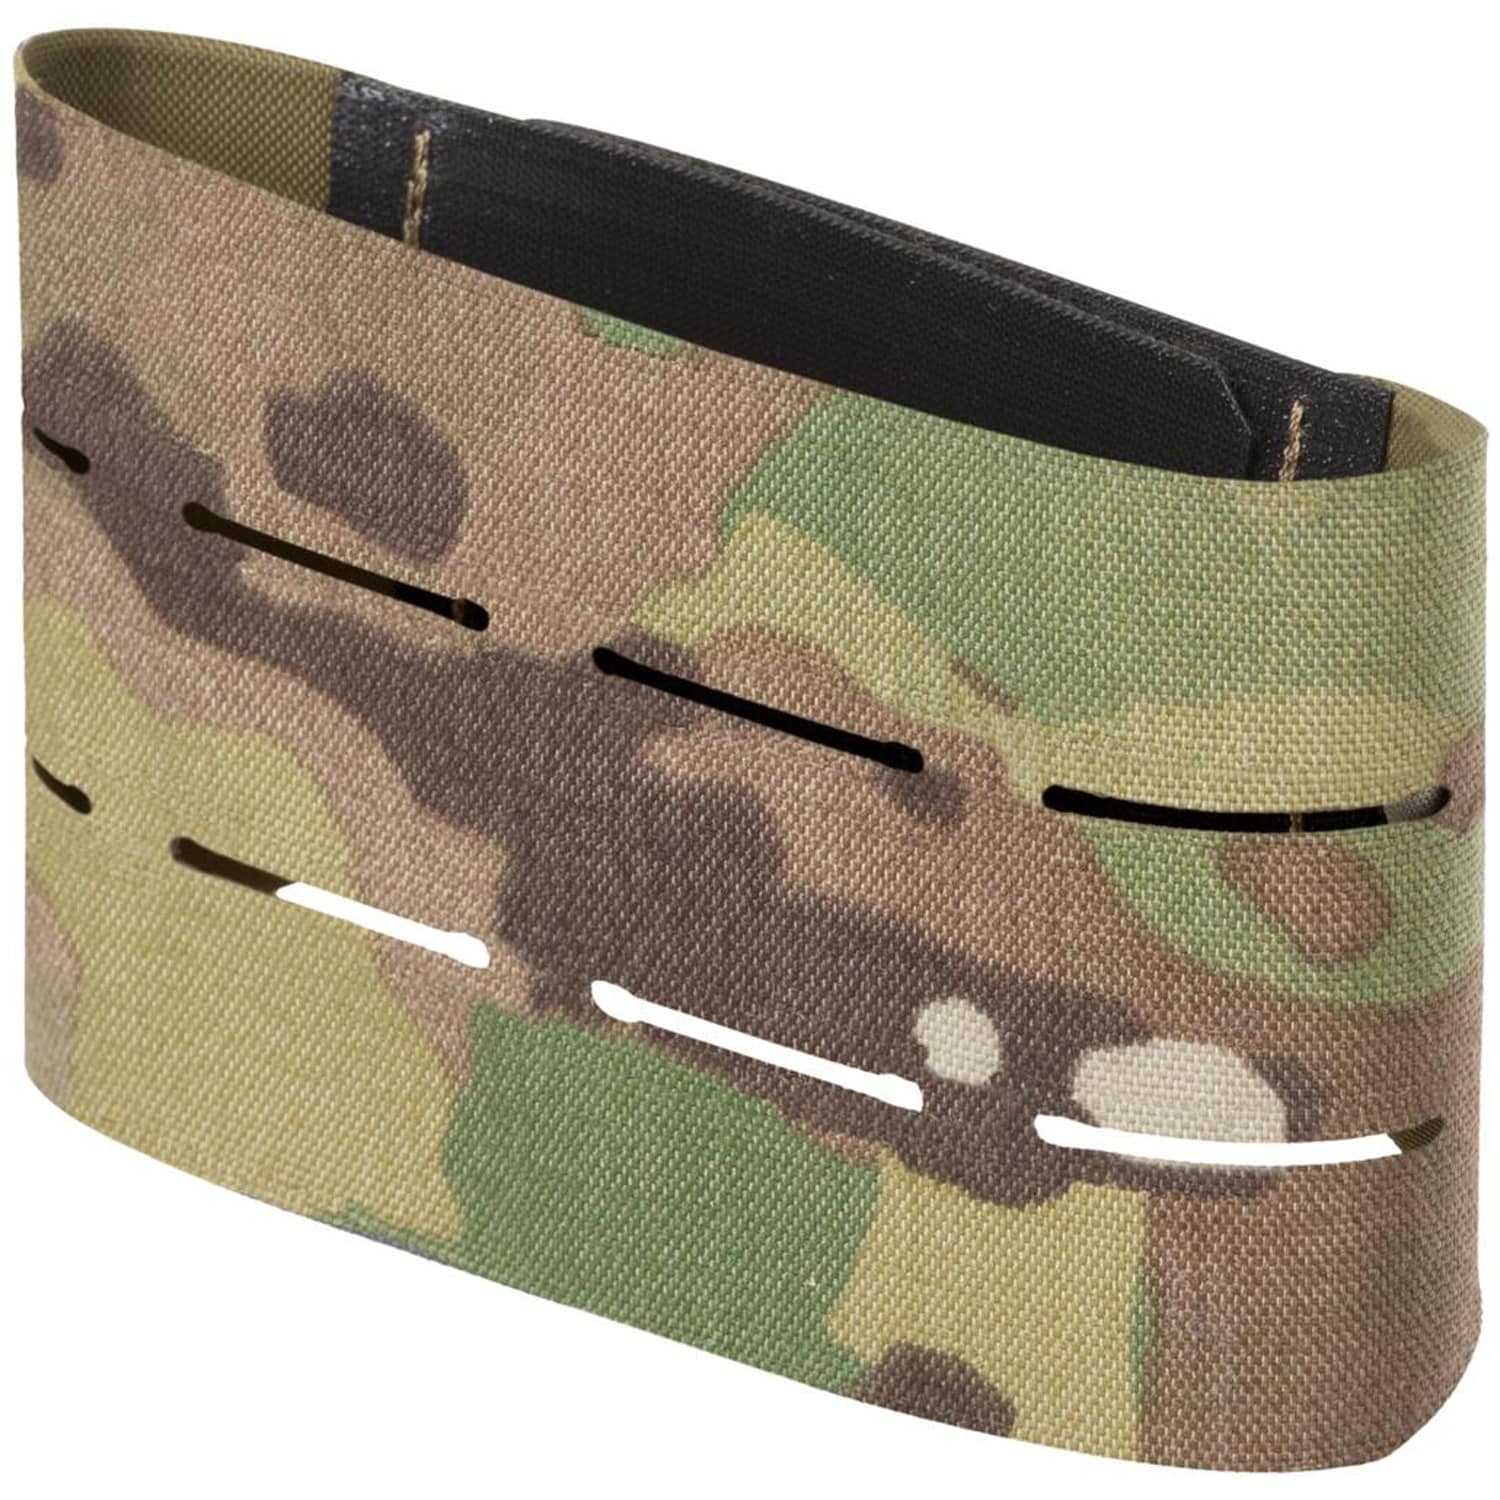 Panel Direct Action Holster MOLLE Wrap - MultiCam